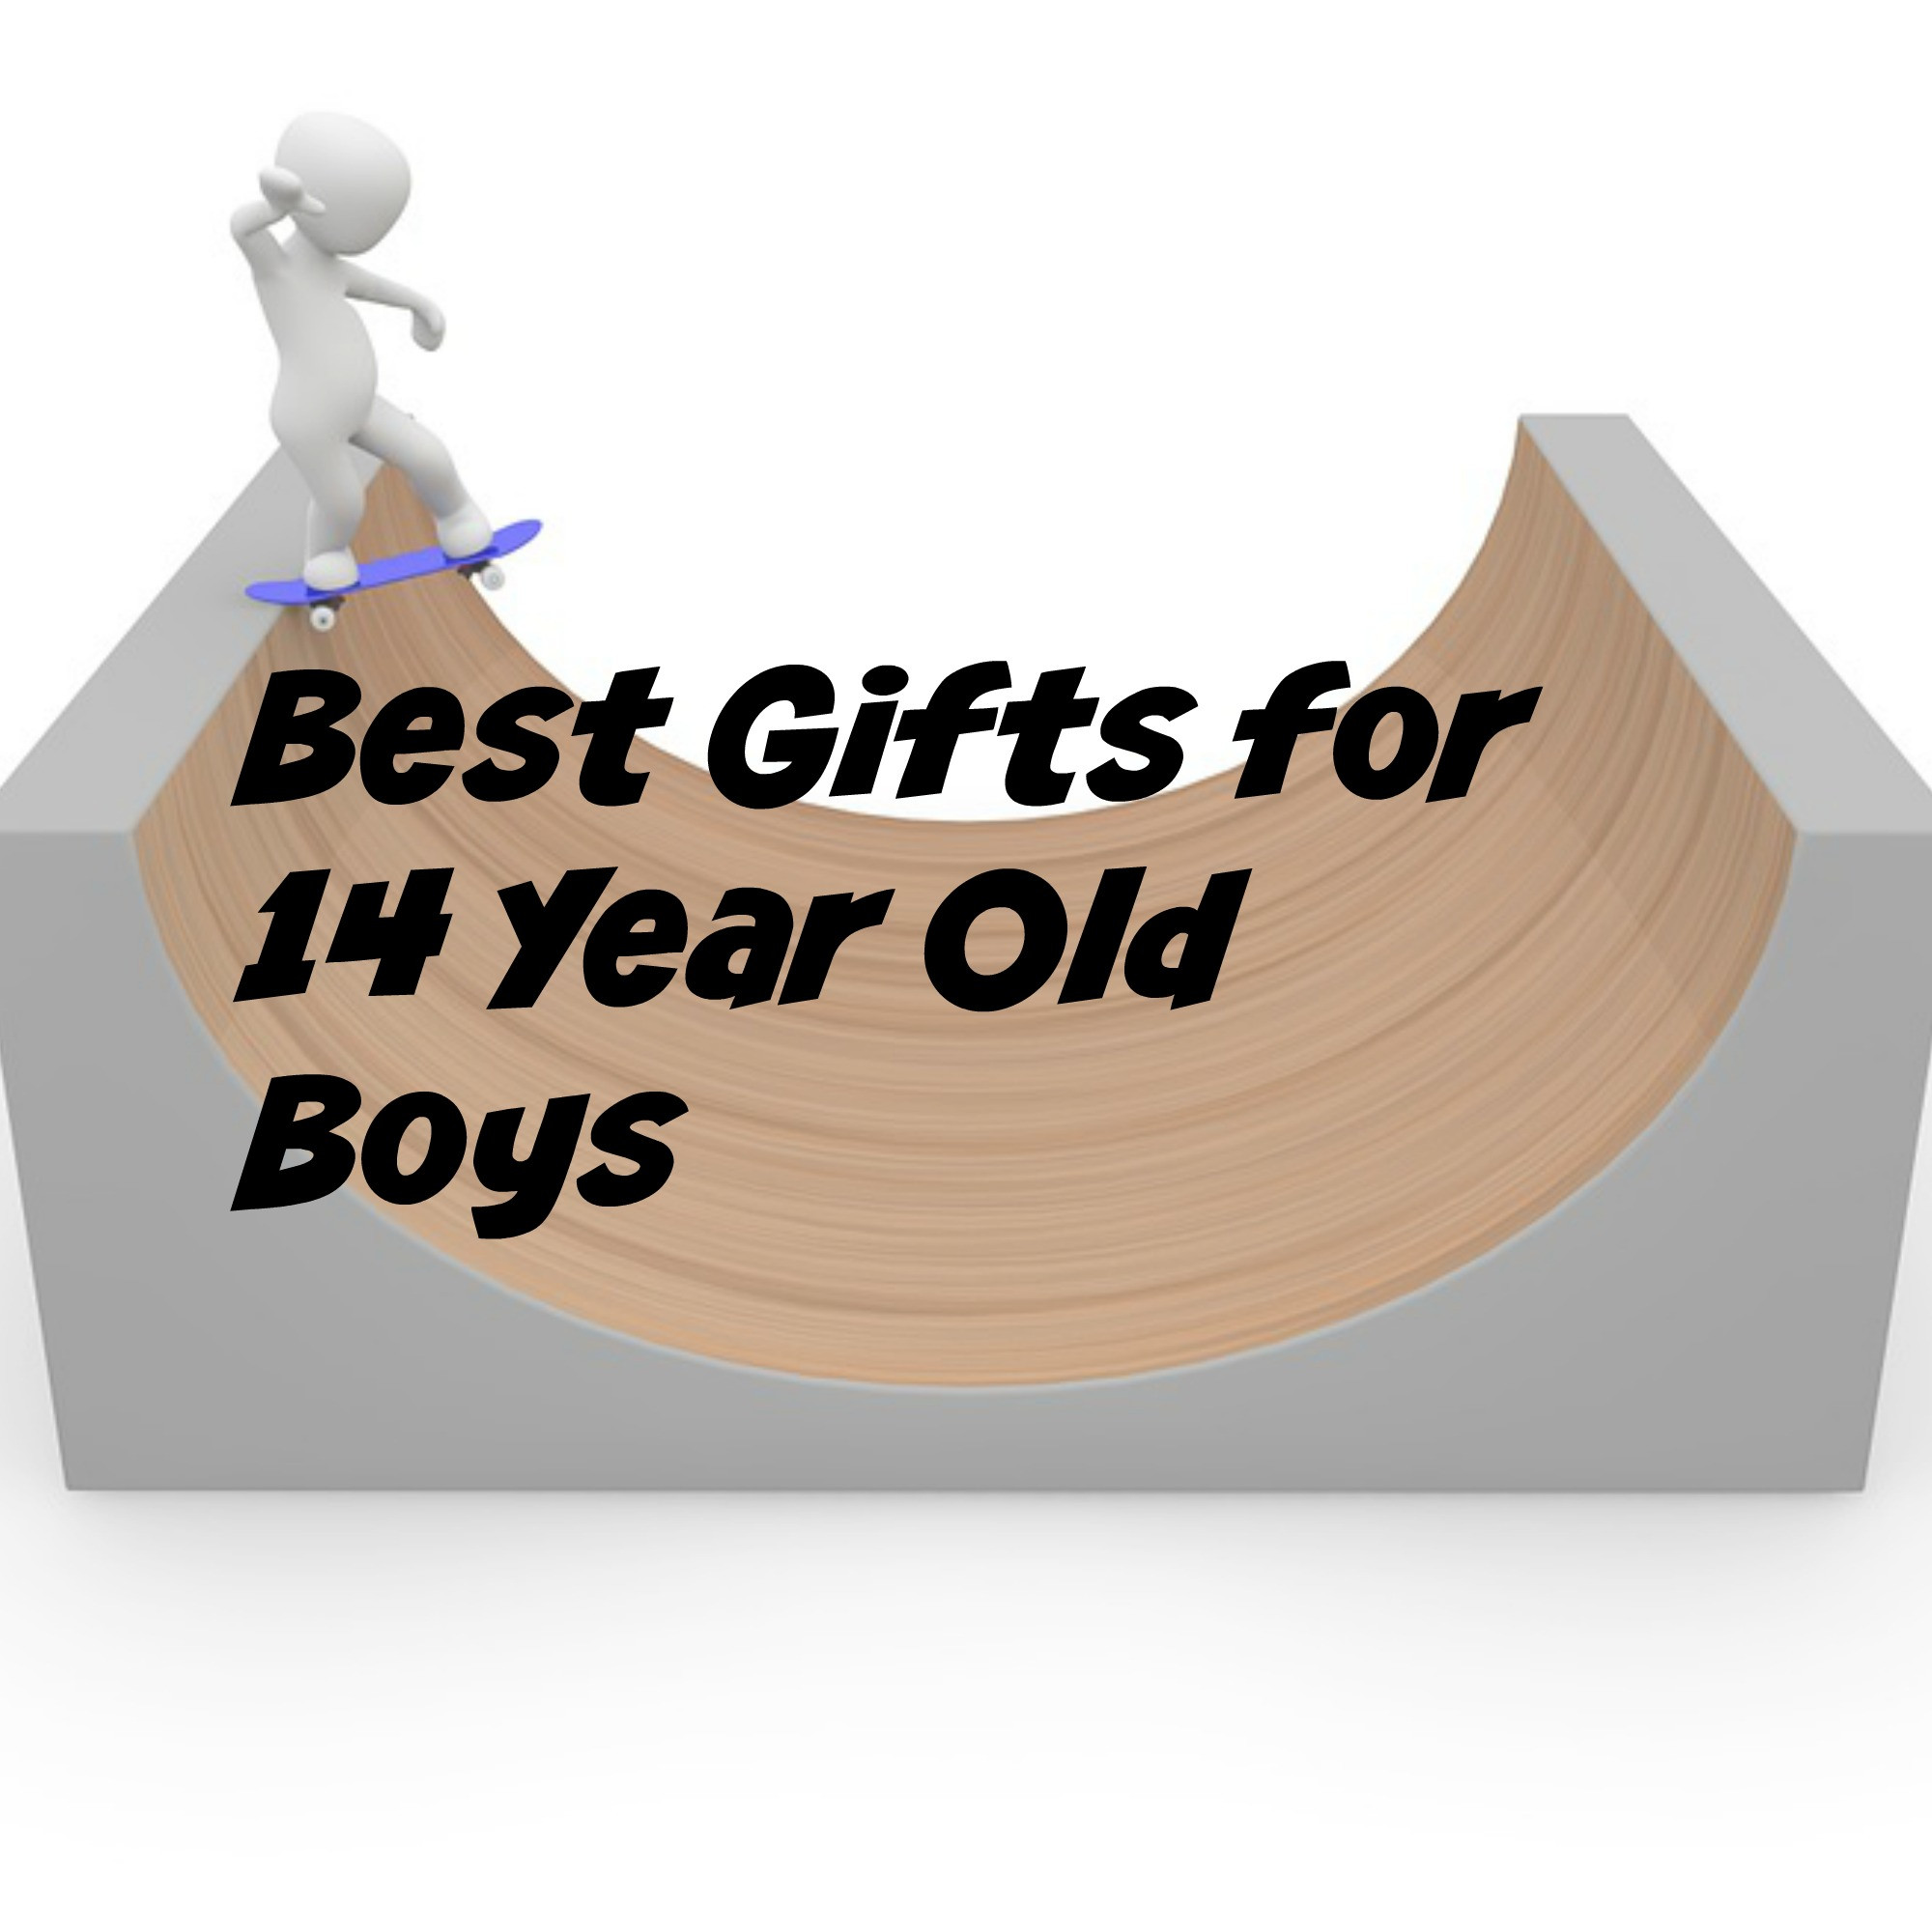 14 Year Old Boy Birthday Gift Ideas
 Best Gifts for 14 Year Old Boys Birthdays and Christmas